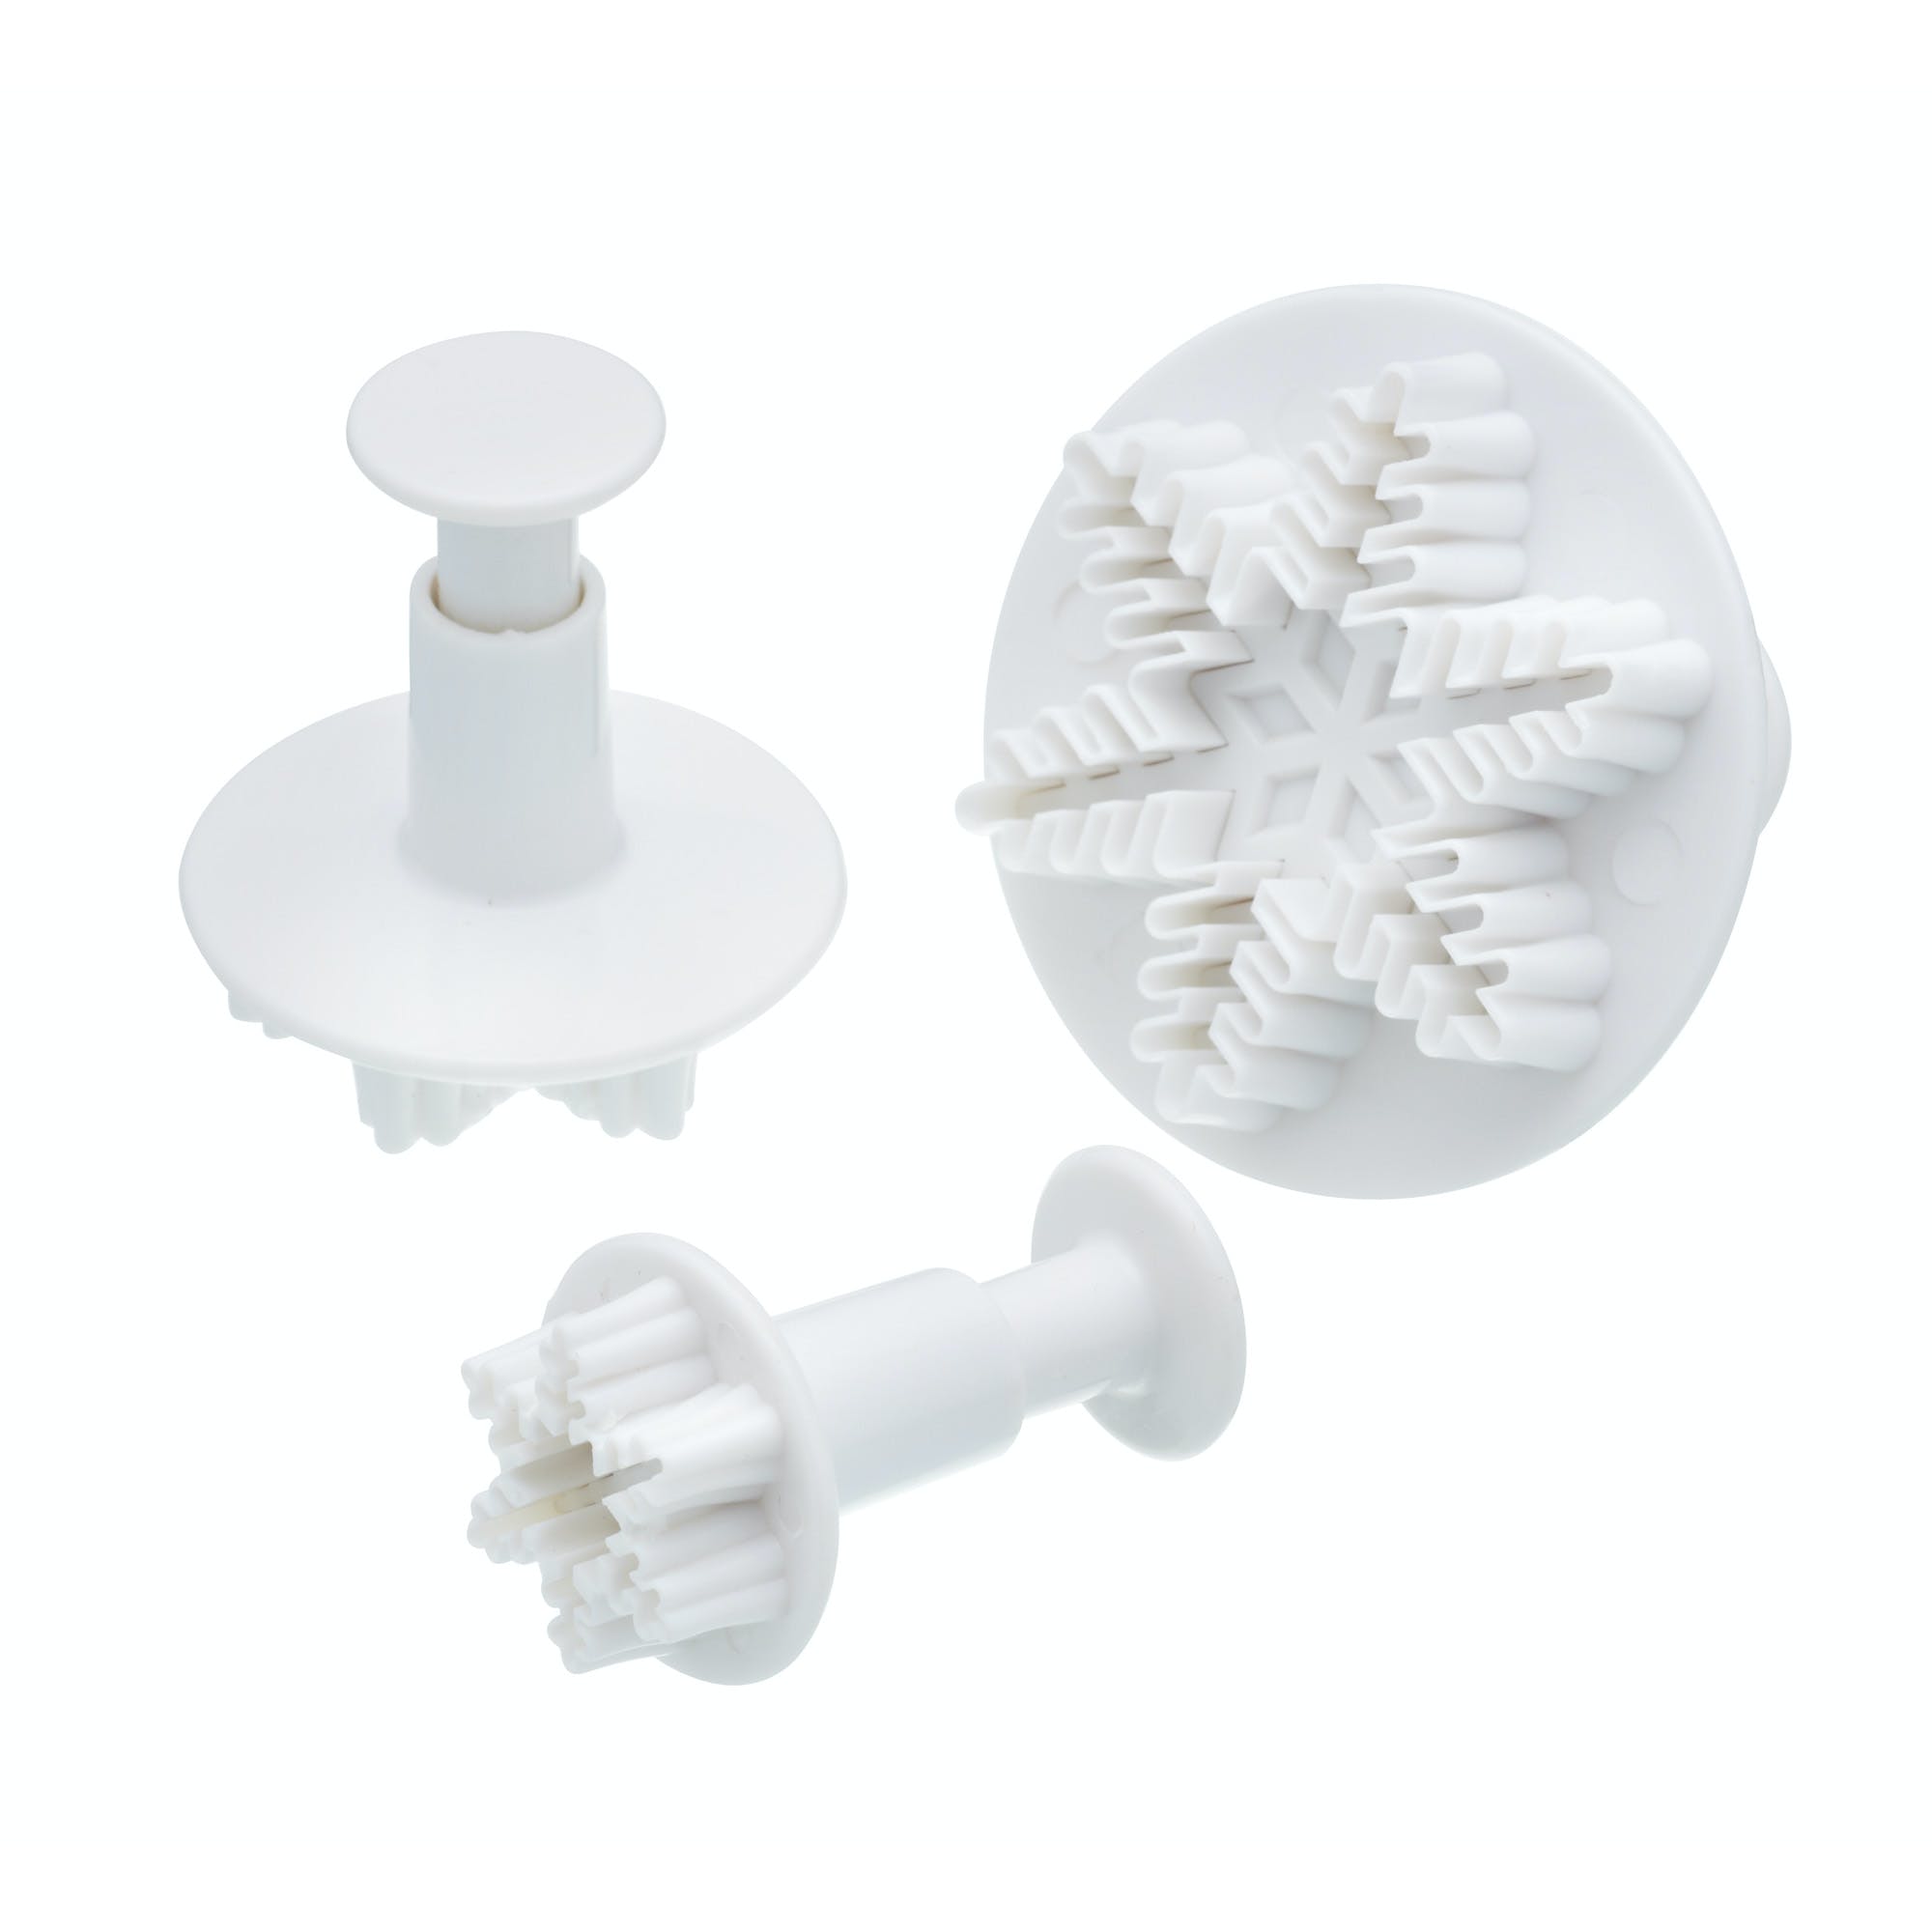 Sweetly Does It Set of 3 Snowflake Fondant Plunger Cutters - The Cooks Cupboard Ltd